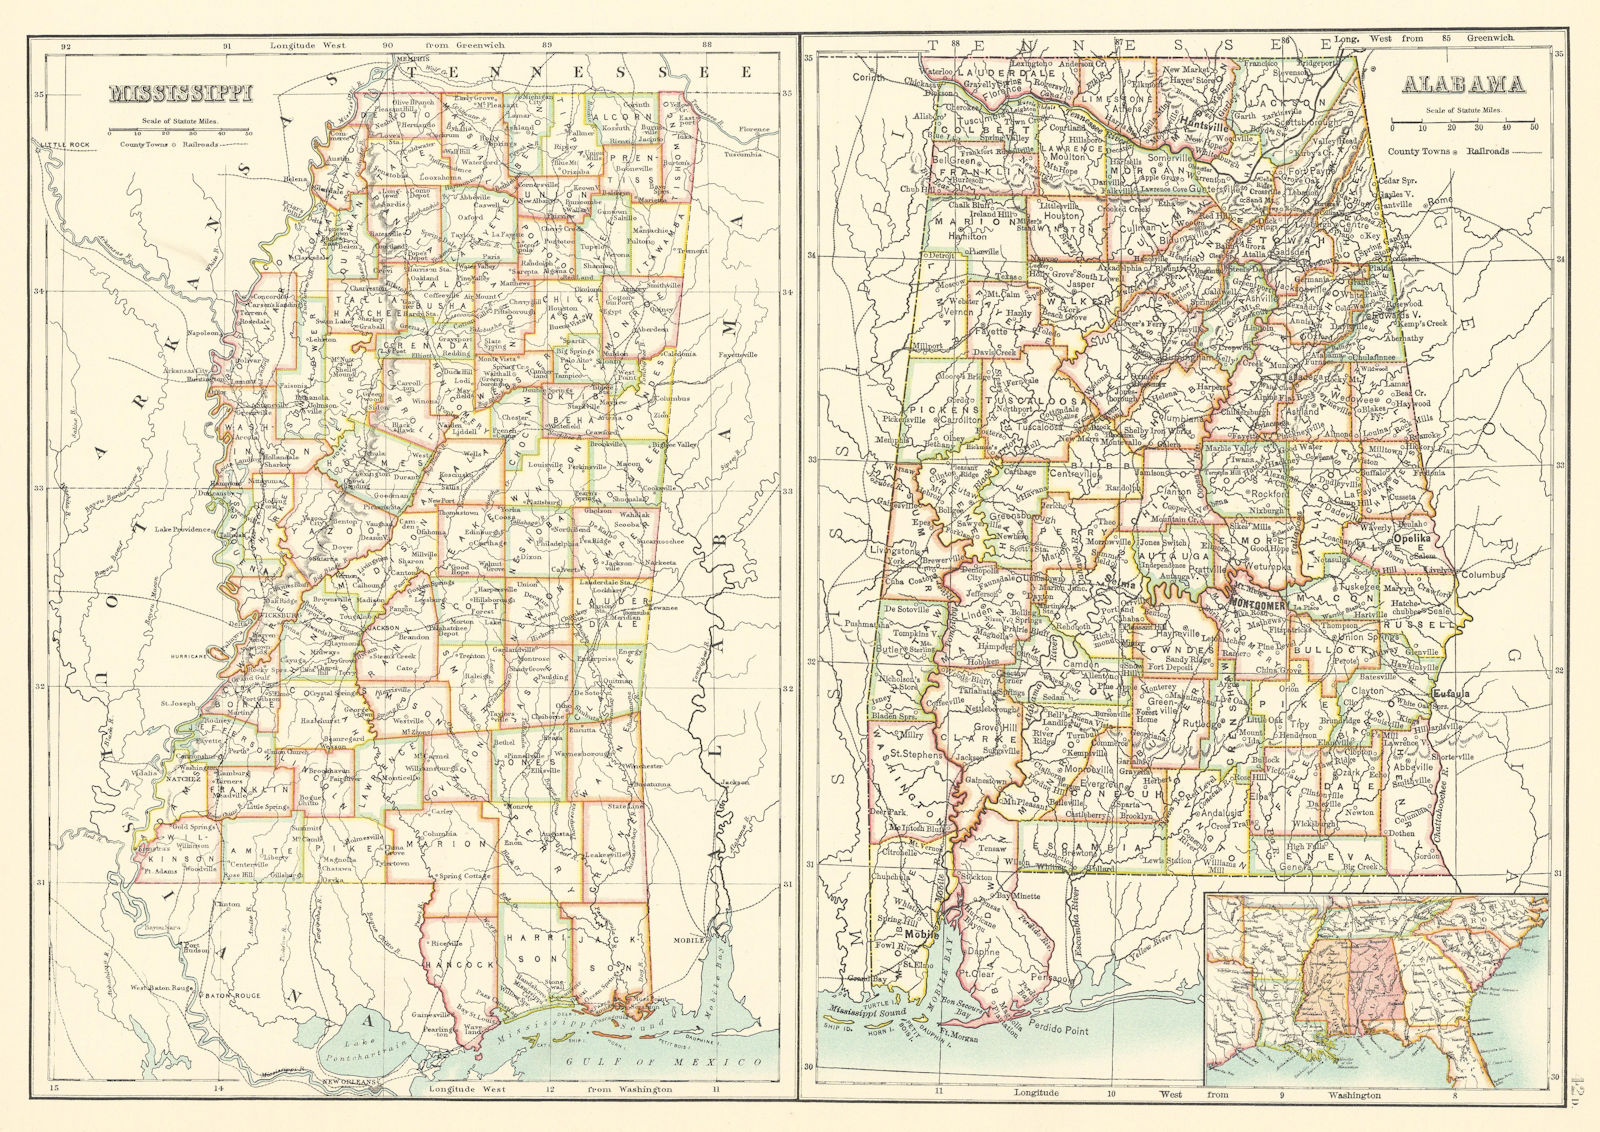 Alabama and Mississippi state maps showing counties. BARTHOLOMEW 1898 old